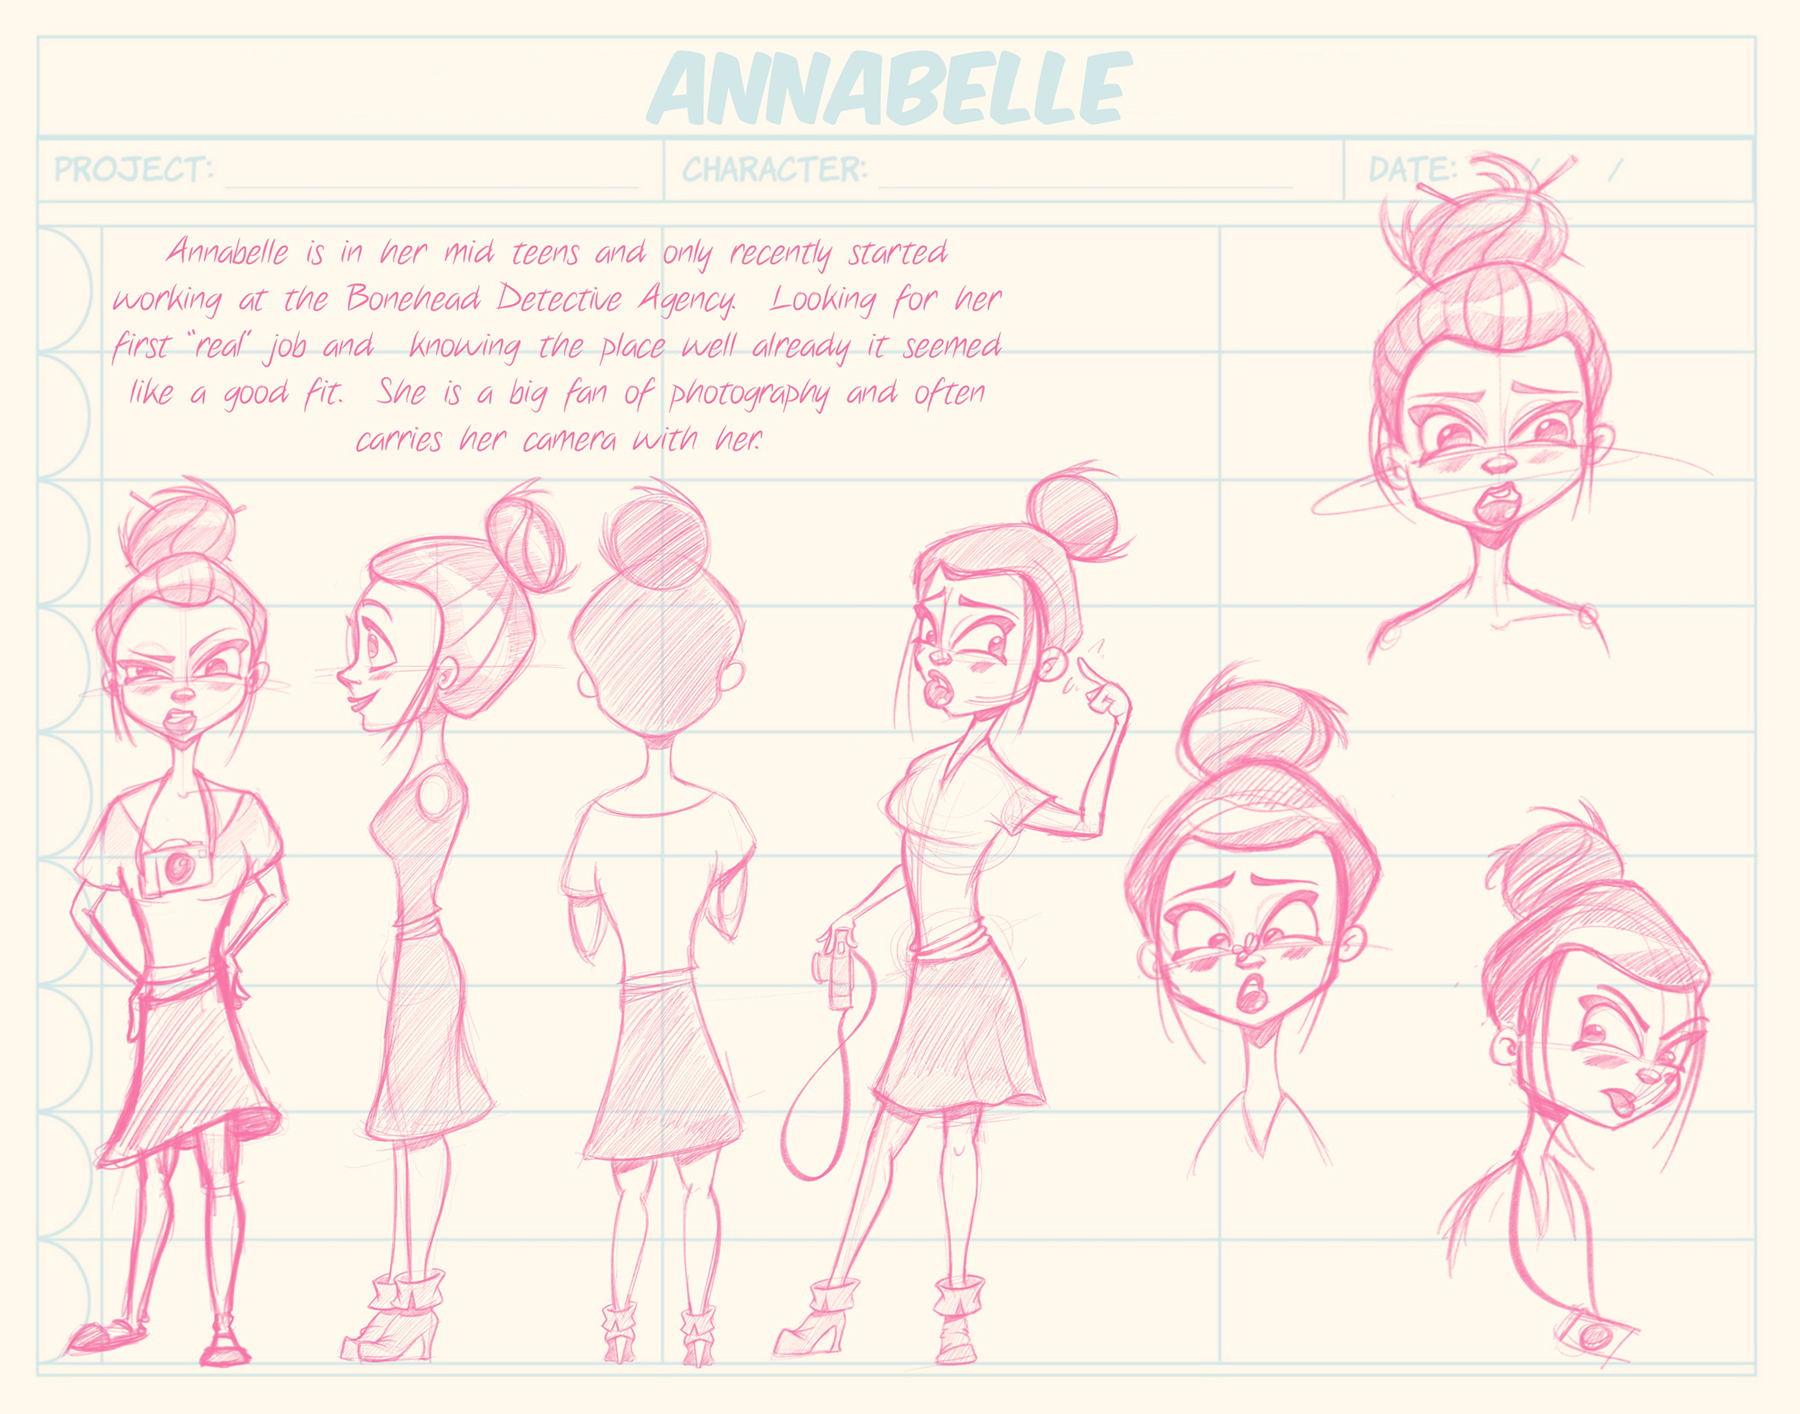 Annabelle model sheet from The Mudsuckle Ritual, image courtesy of the artist